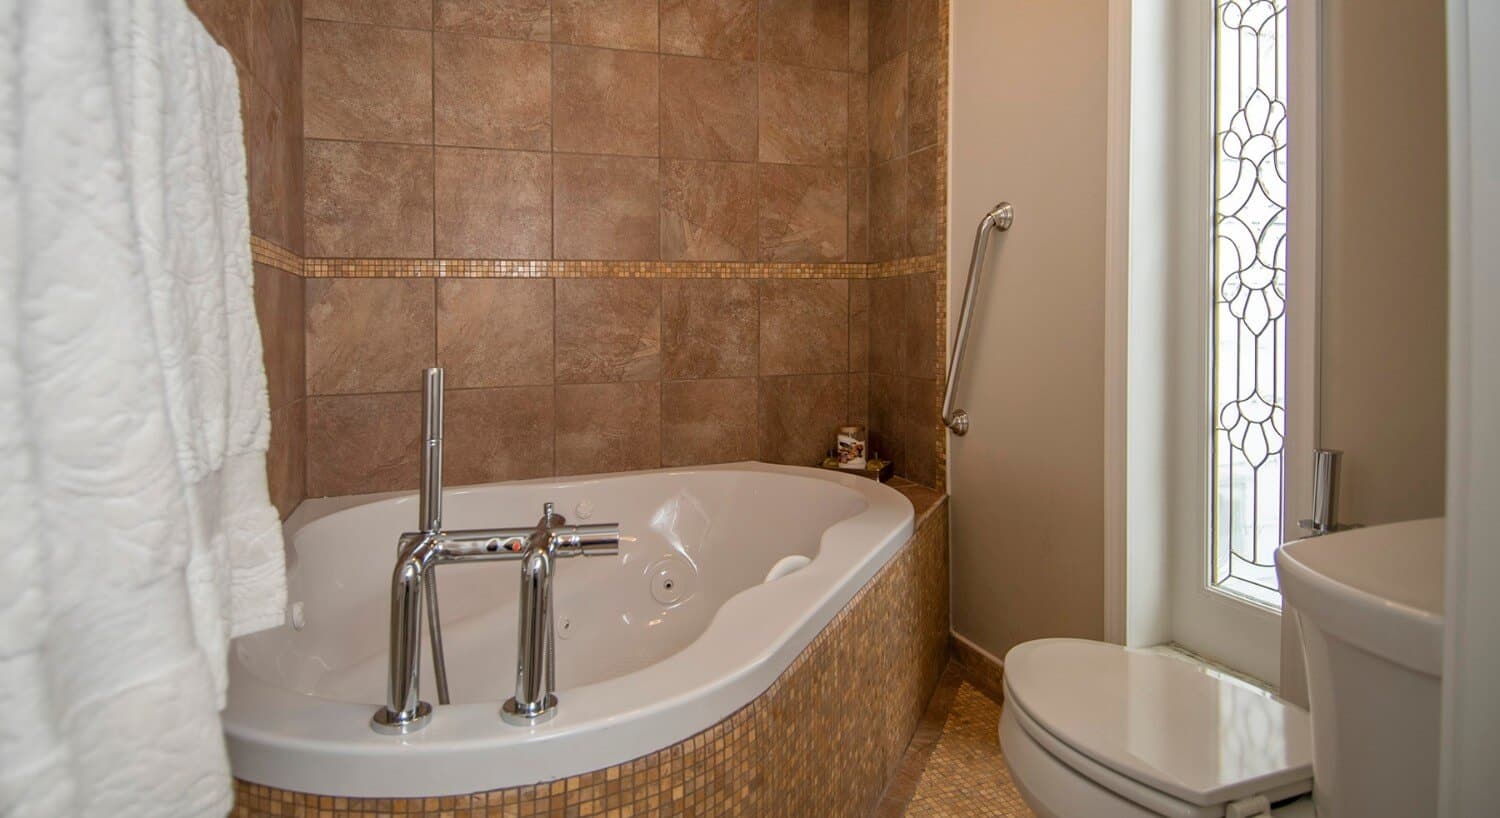 Bathroom tiled in tan with a large soaking tub. 